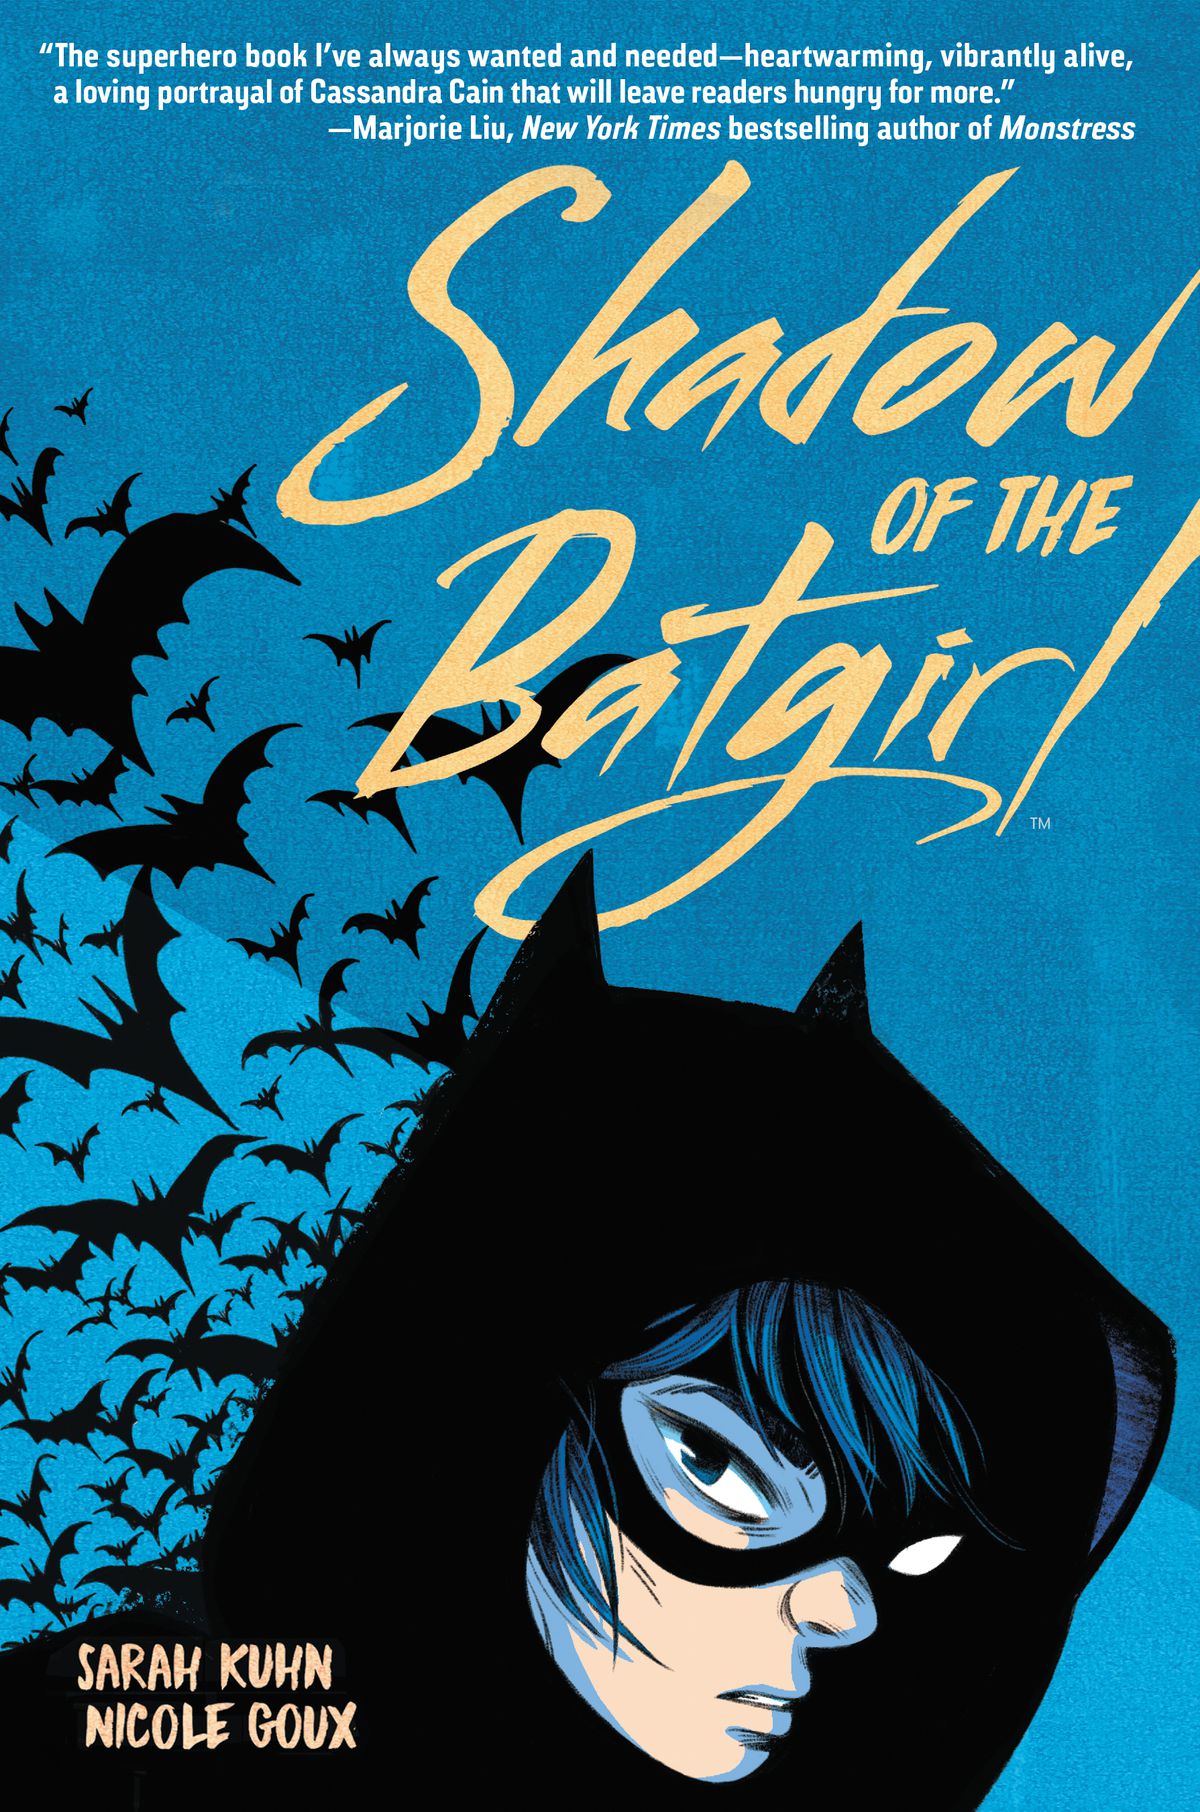 Cassandra cain wears a domino mask and a bat-eared hood, surrounded by a flock of bats, on the cover of Shadow of the Batgirl, DC Comics (2020).